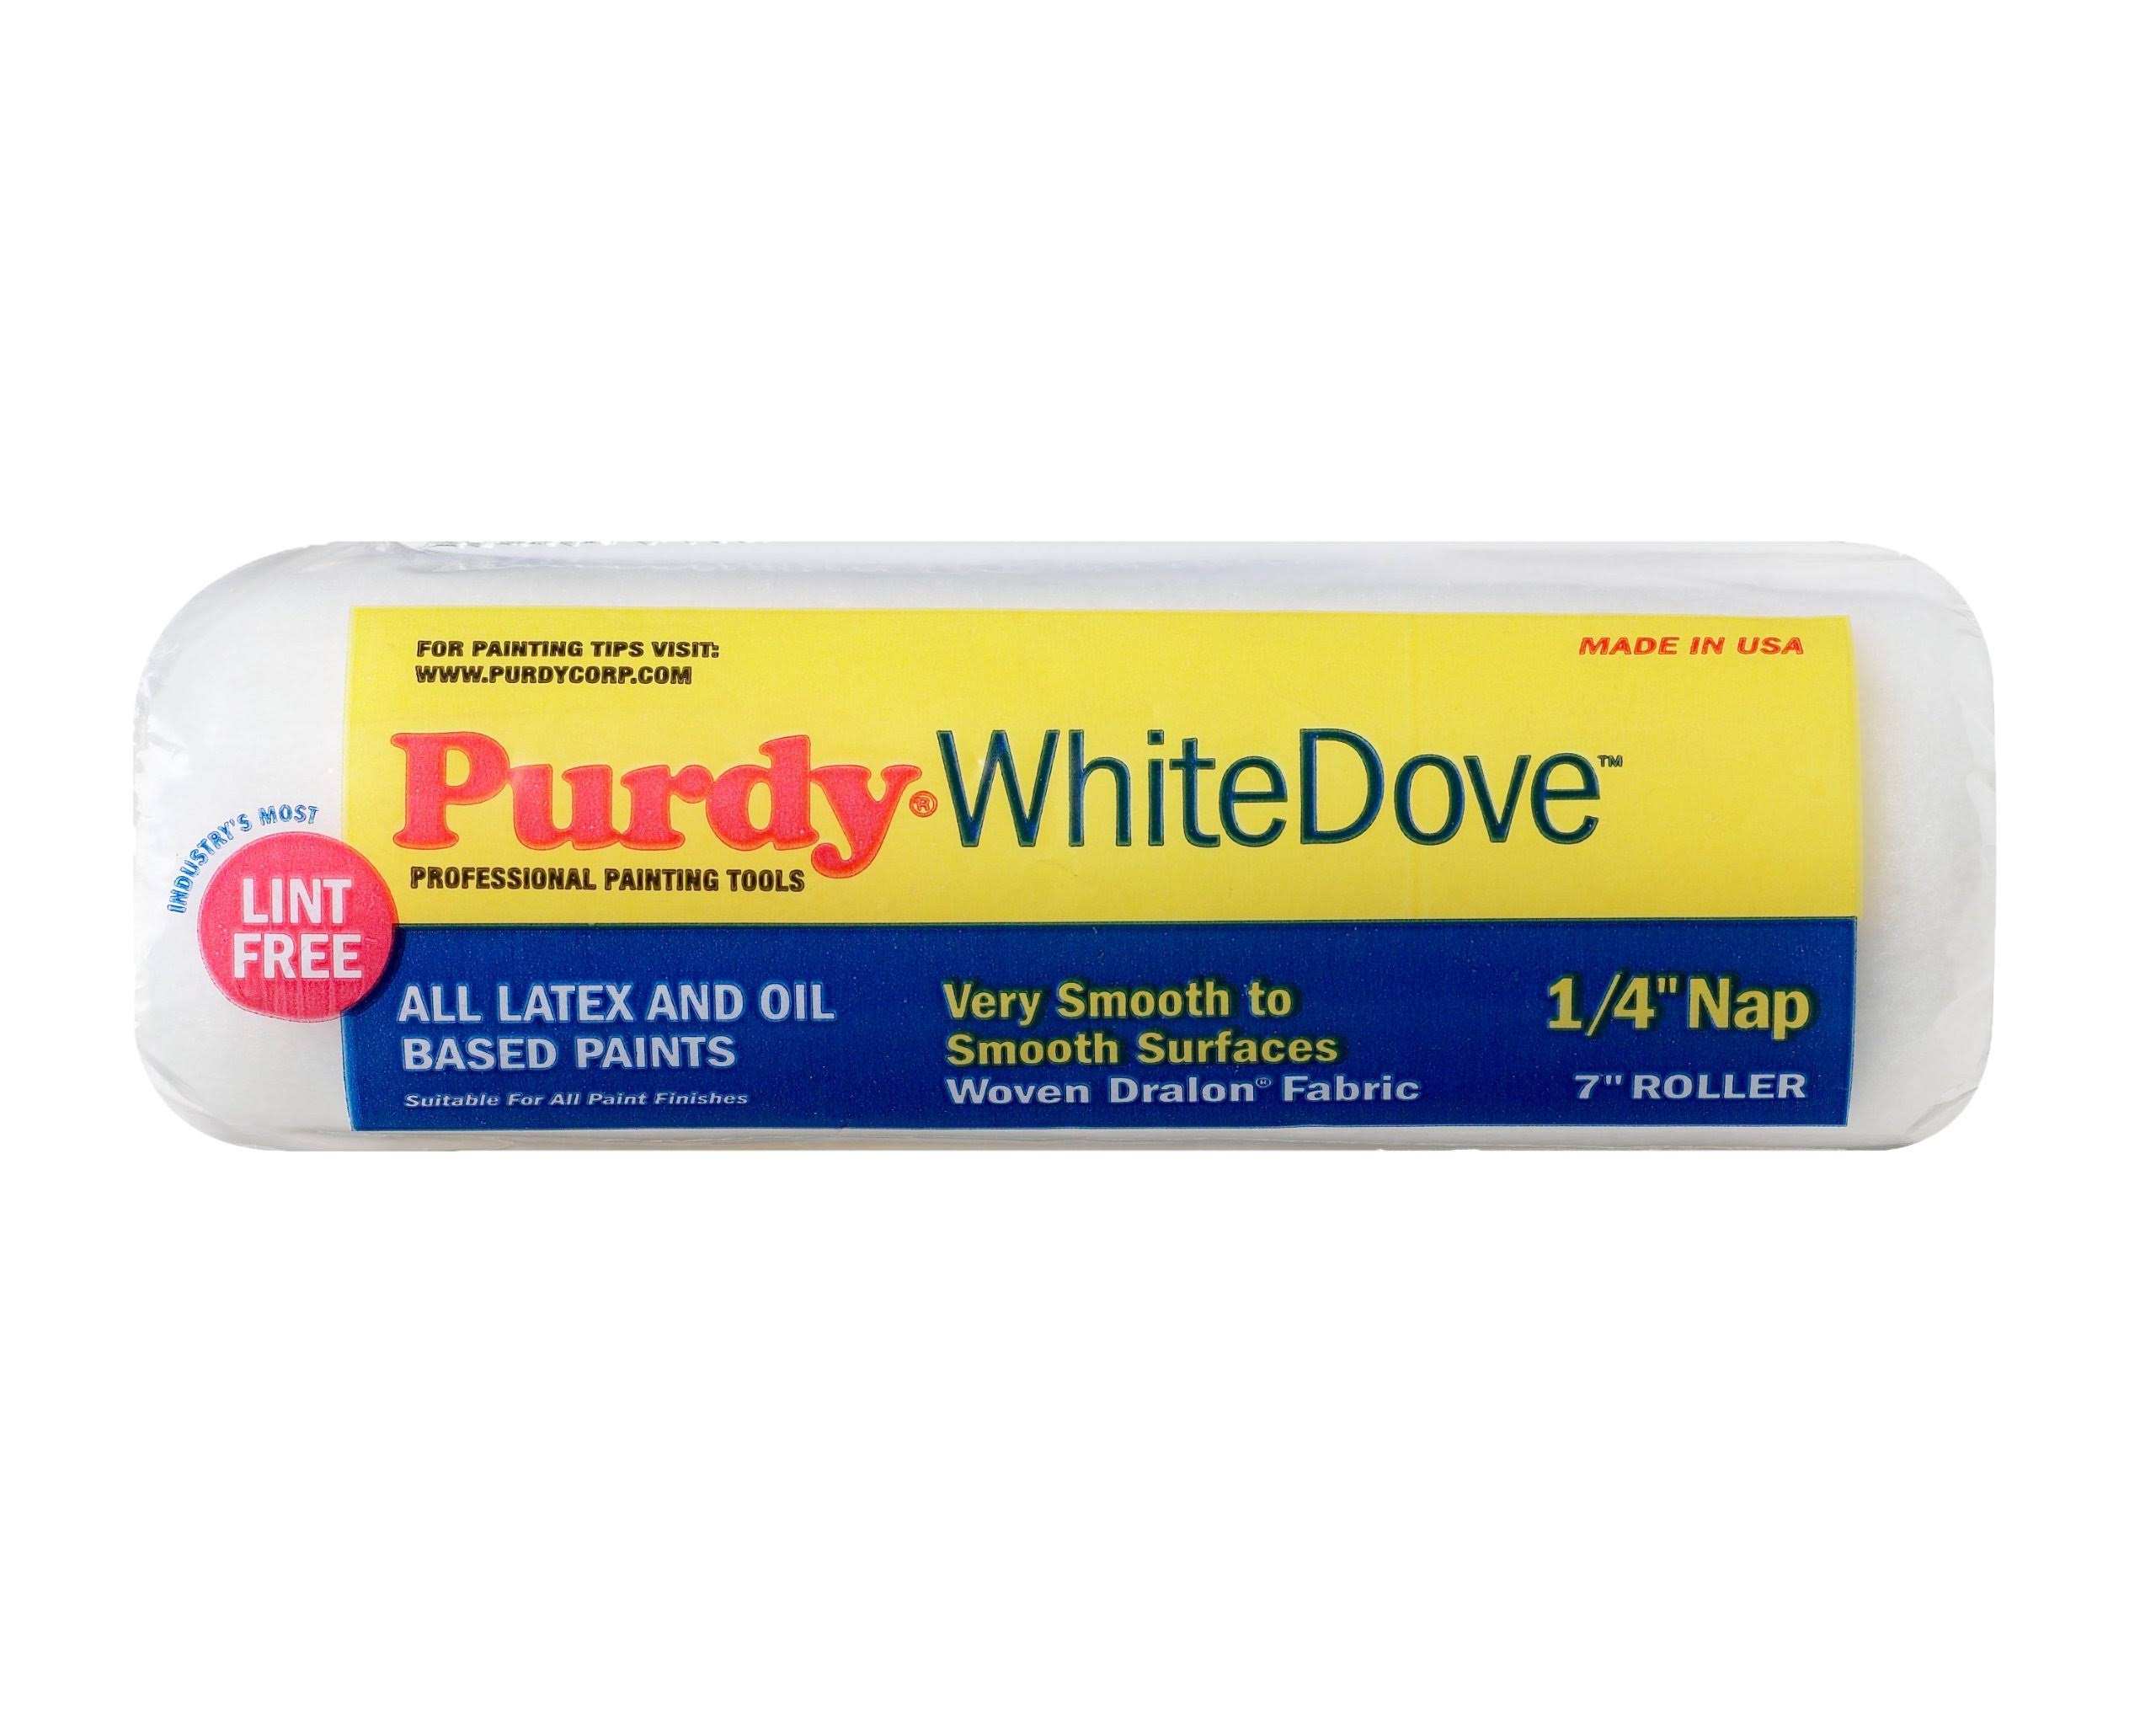 Purdy White Dove Roller Cover - 7" x 1/4"